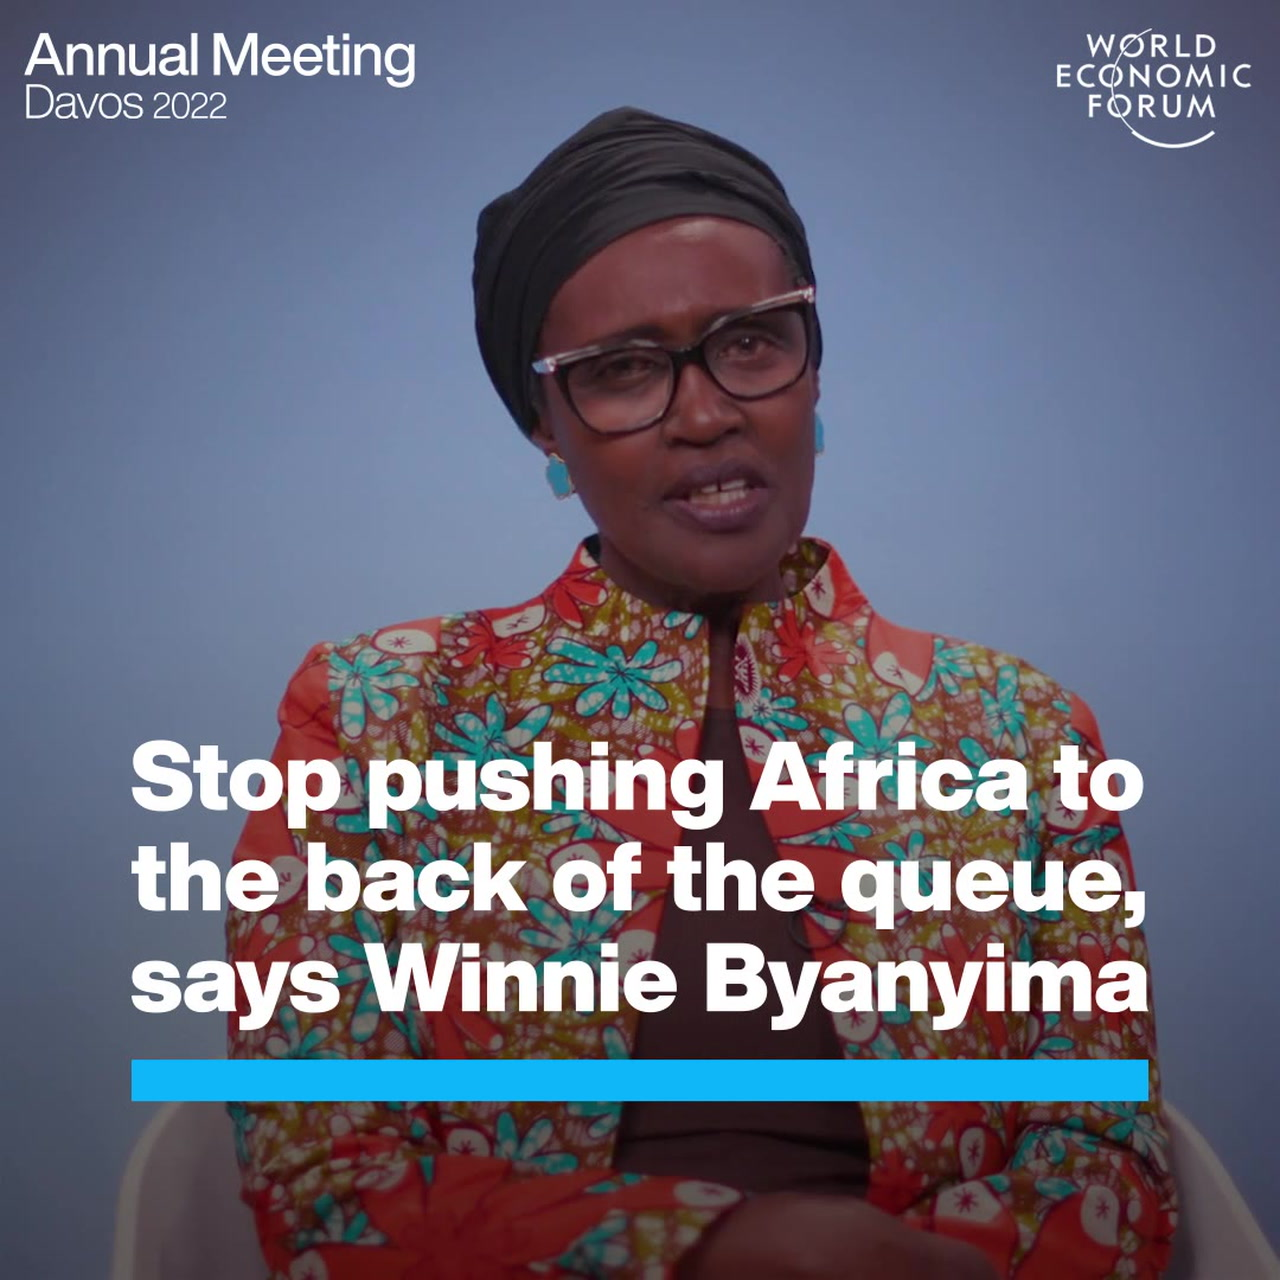 Blog - Davos 2022 "Stop pushing Africa to the back..."